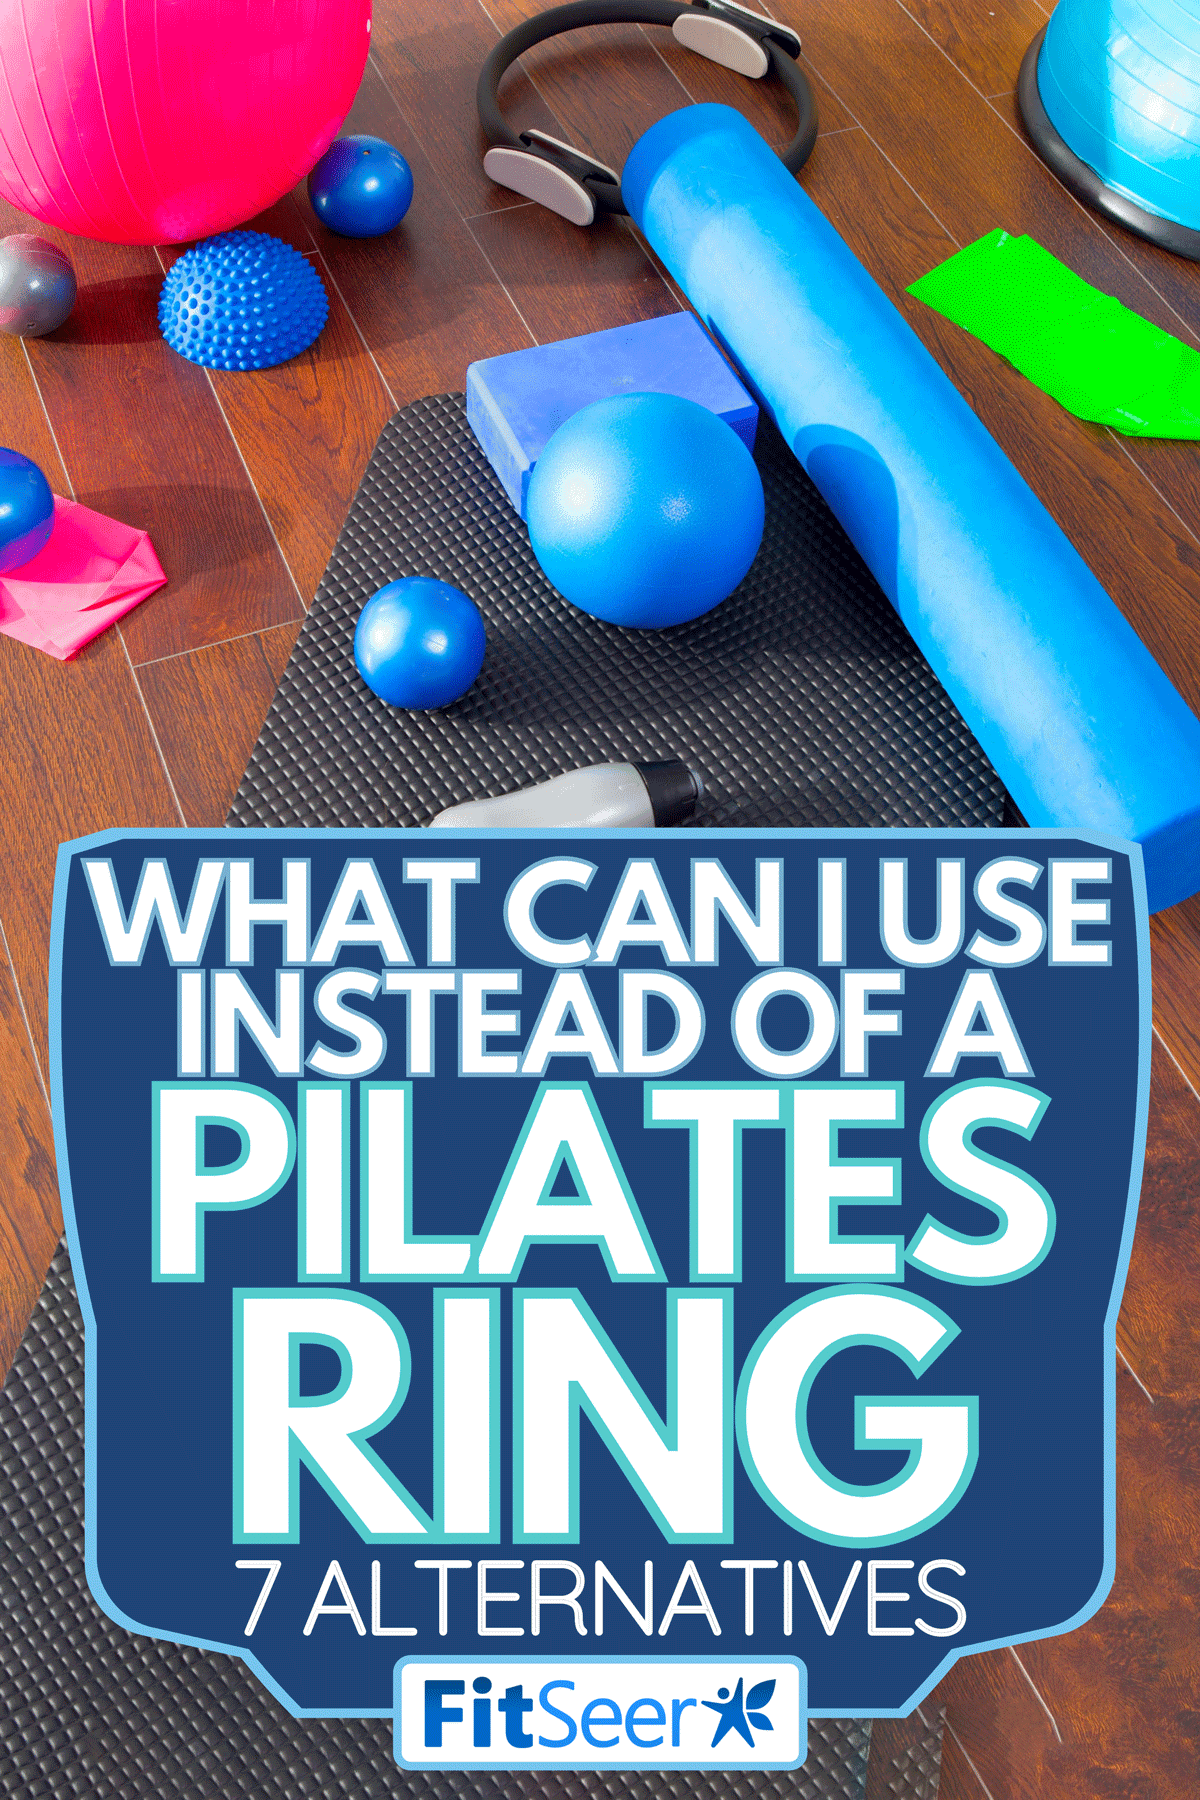 An Aerobic Pilates stuff like mat balls roller magic ring rubber bands on wooden floor, What Can I Use Instead of a Pilates Ring [7 Alternatives]